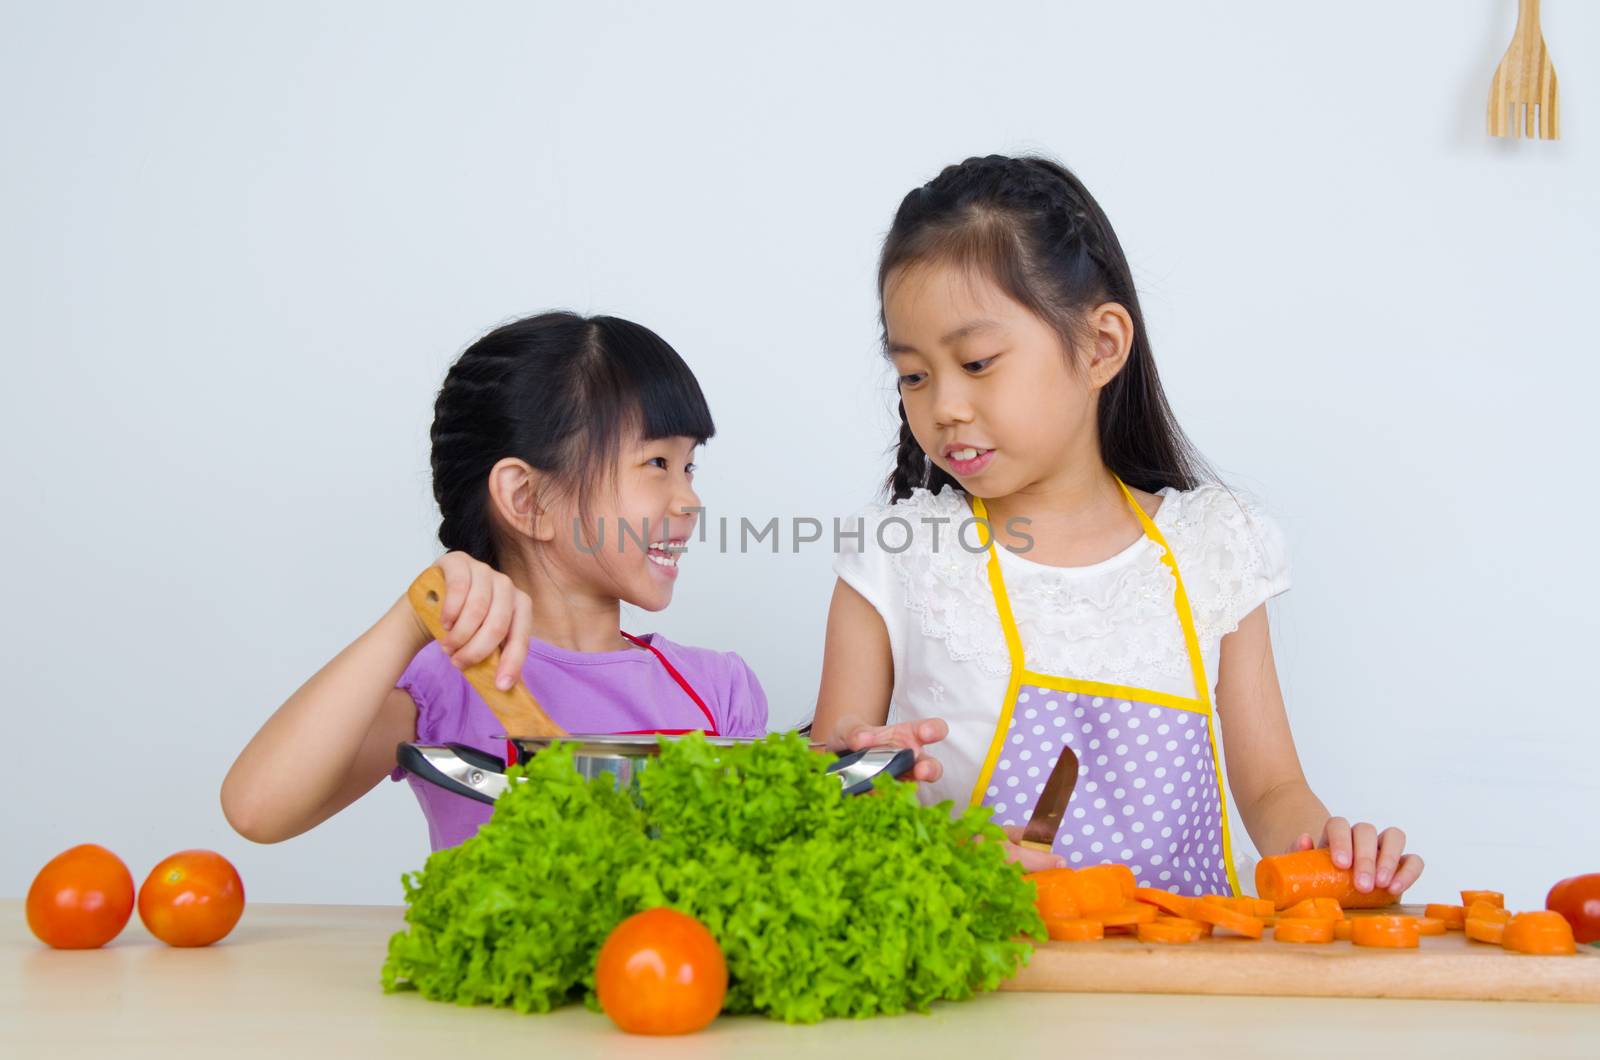 kids having fun with cooking. Healthy eating concept.